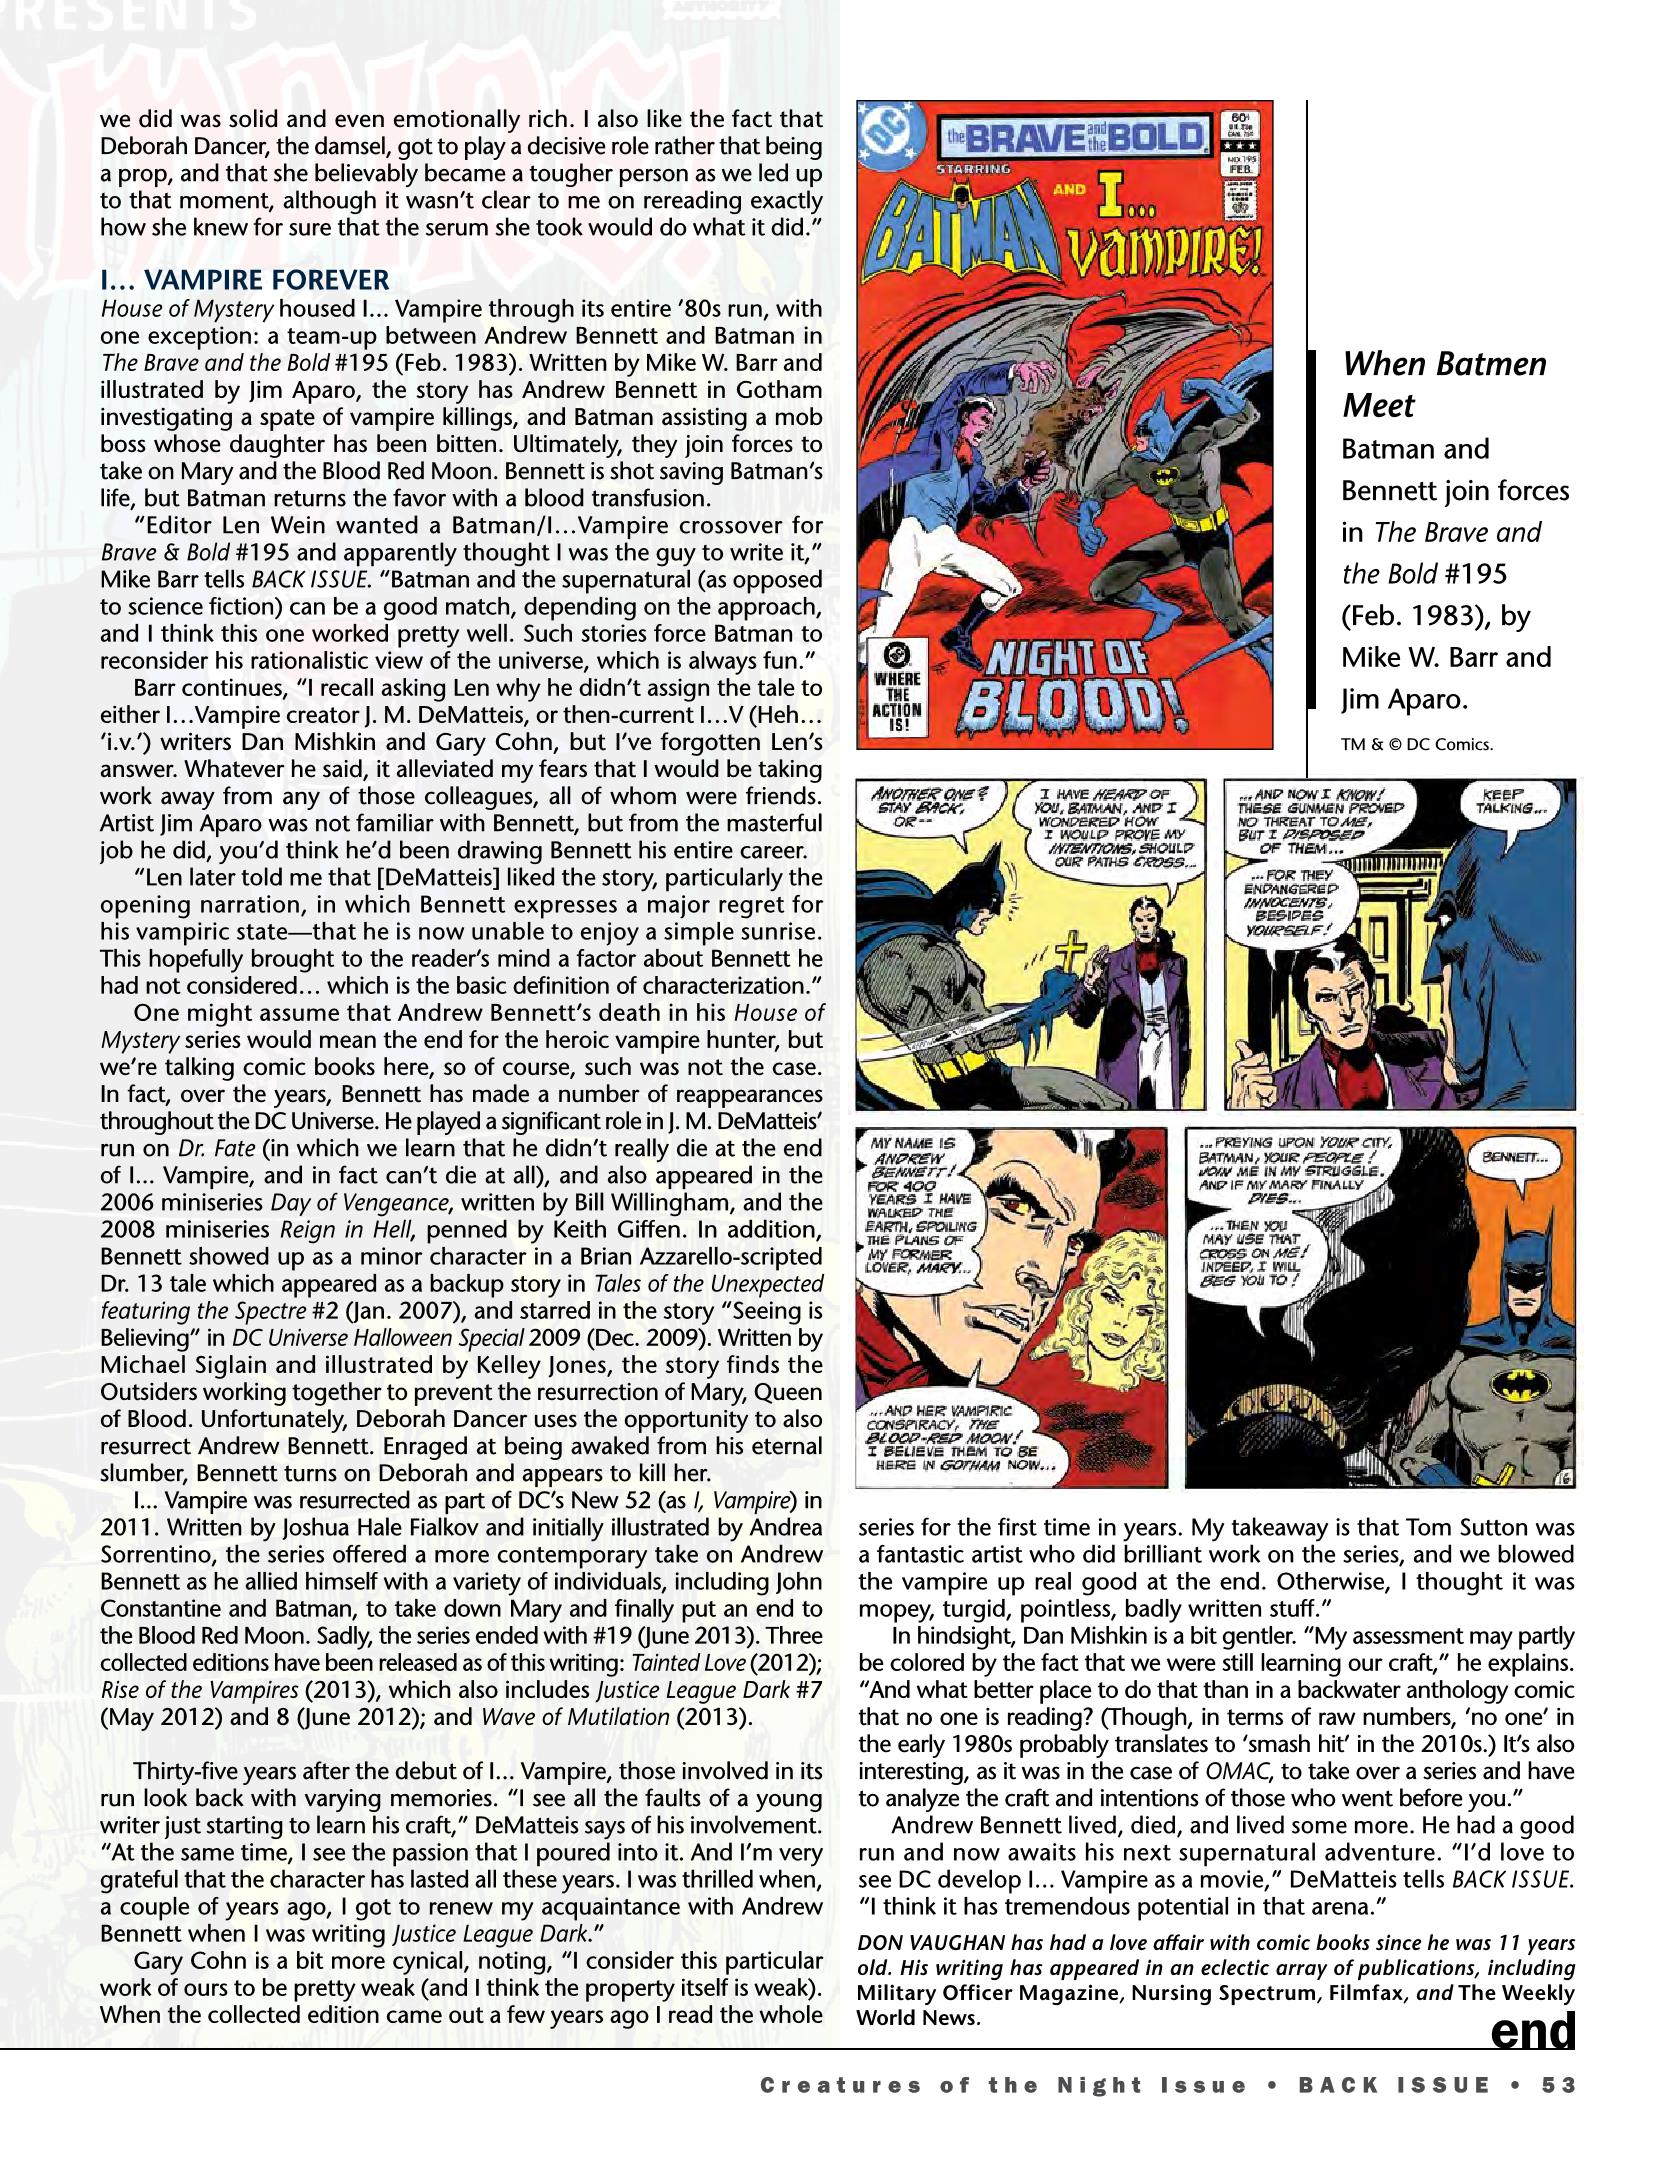 Read online Back Issue comic -  Issue #95 - 51